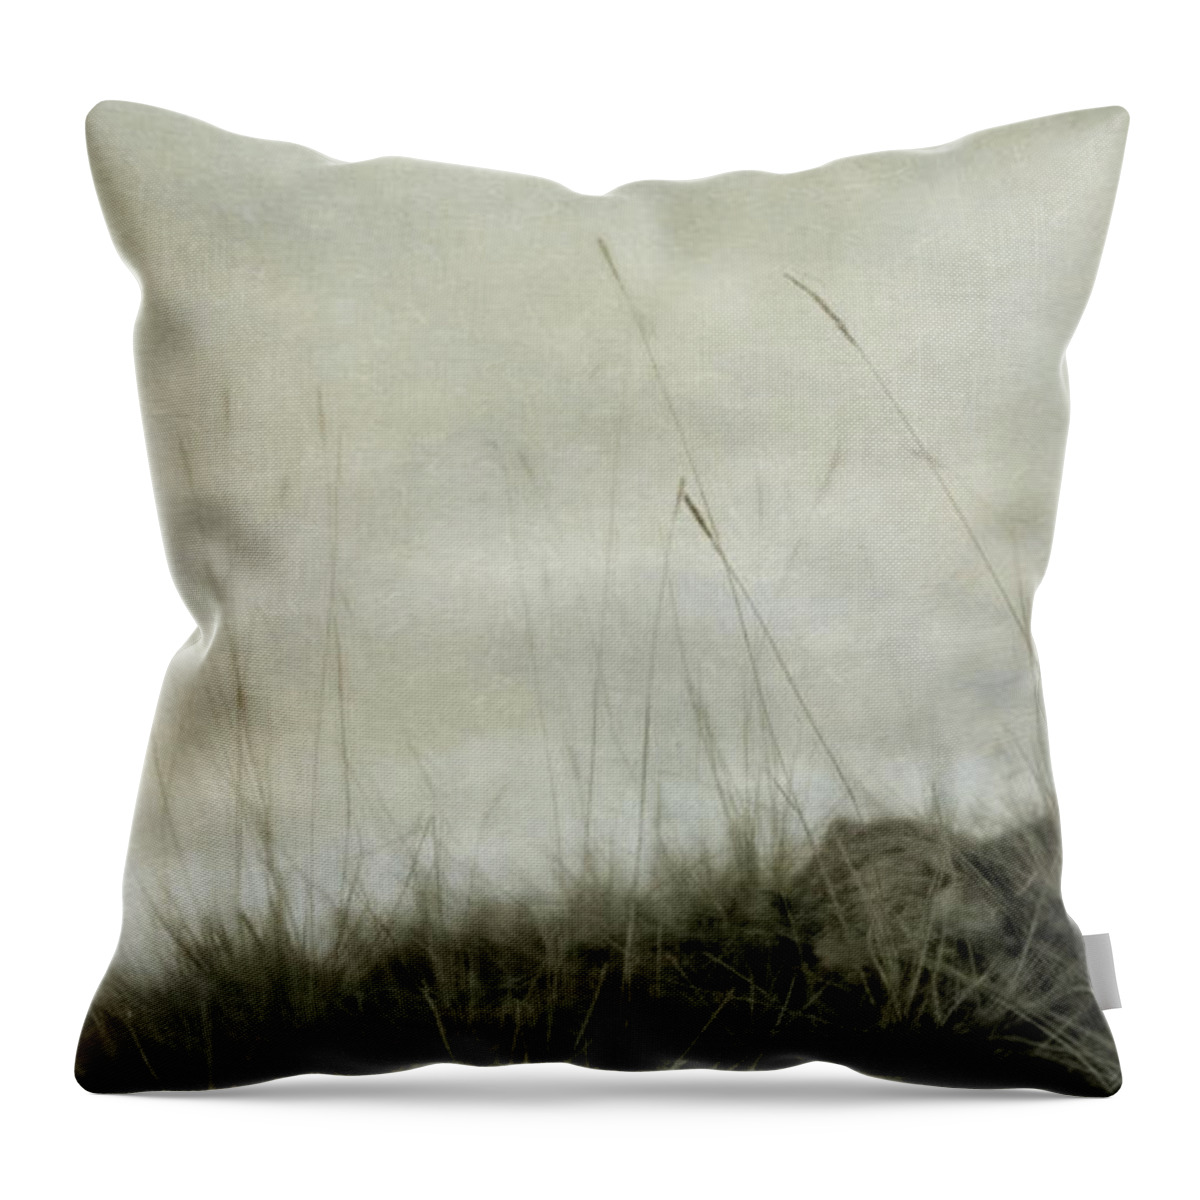 Lensbaby Throw Pillow featuring the photograph Dream by Priska Wettstein